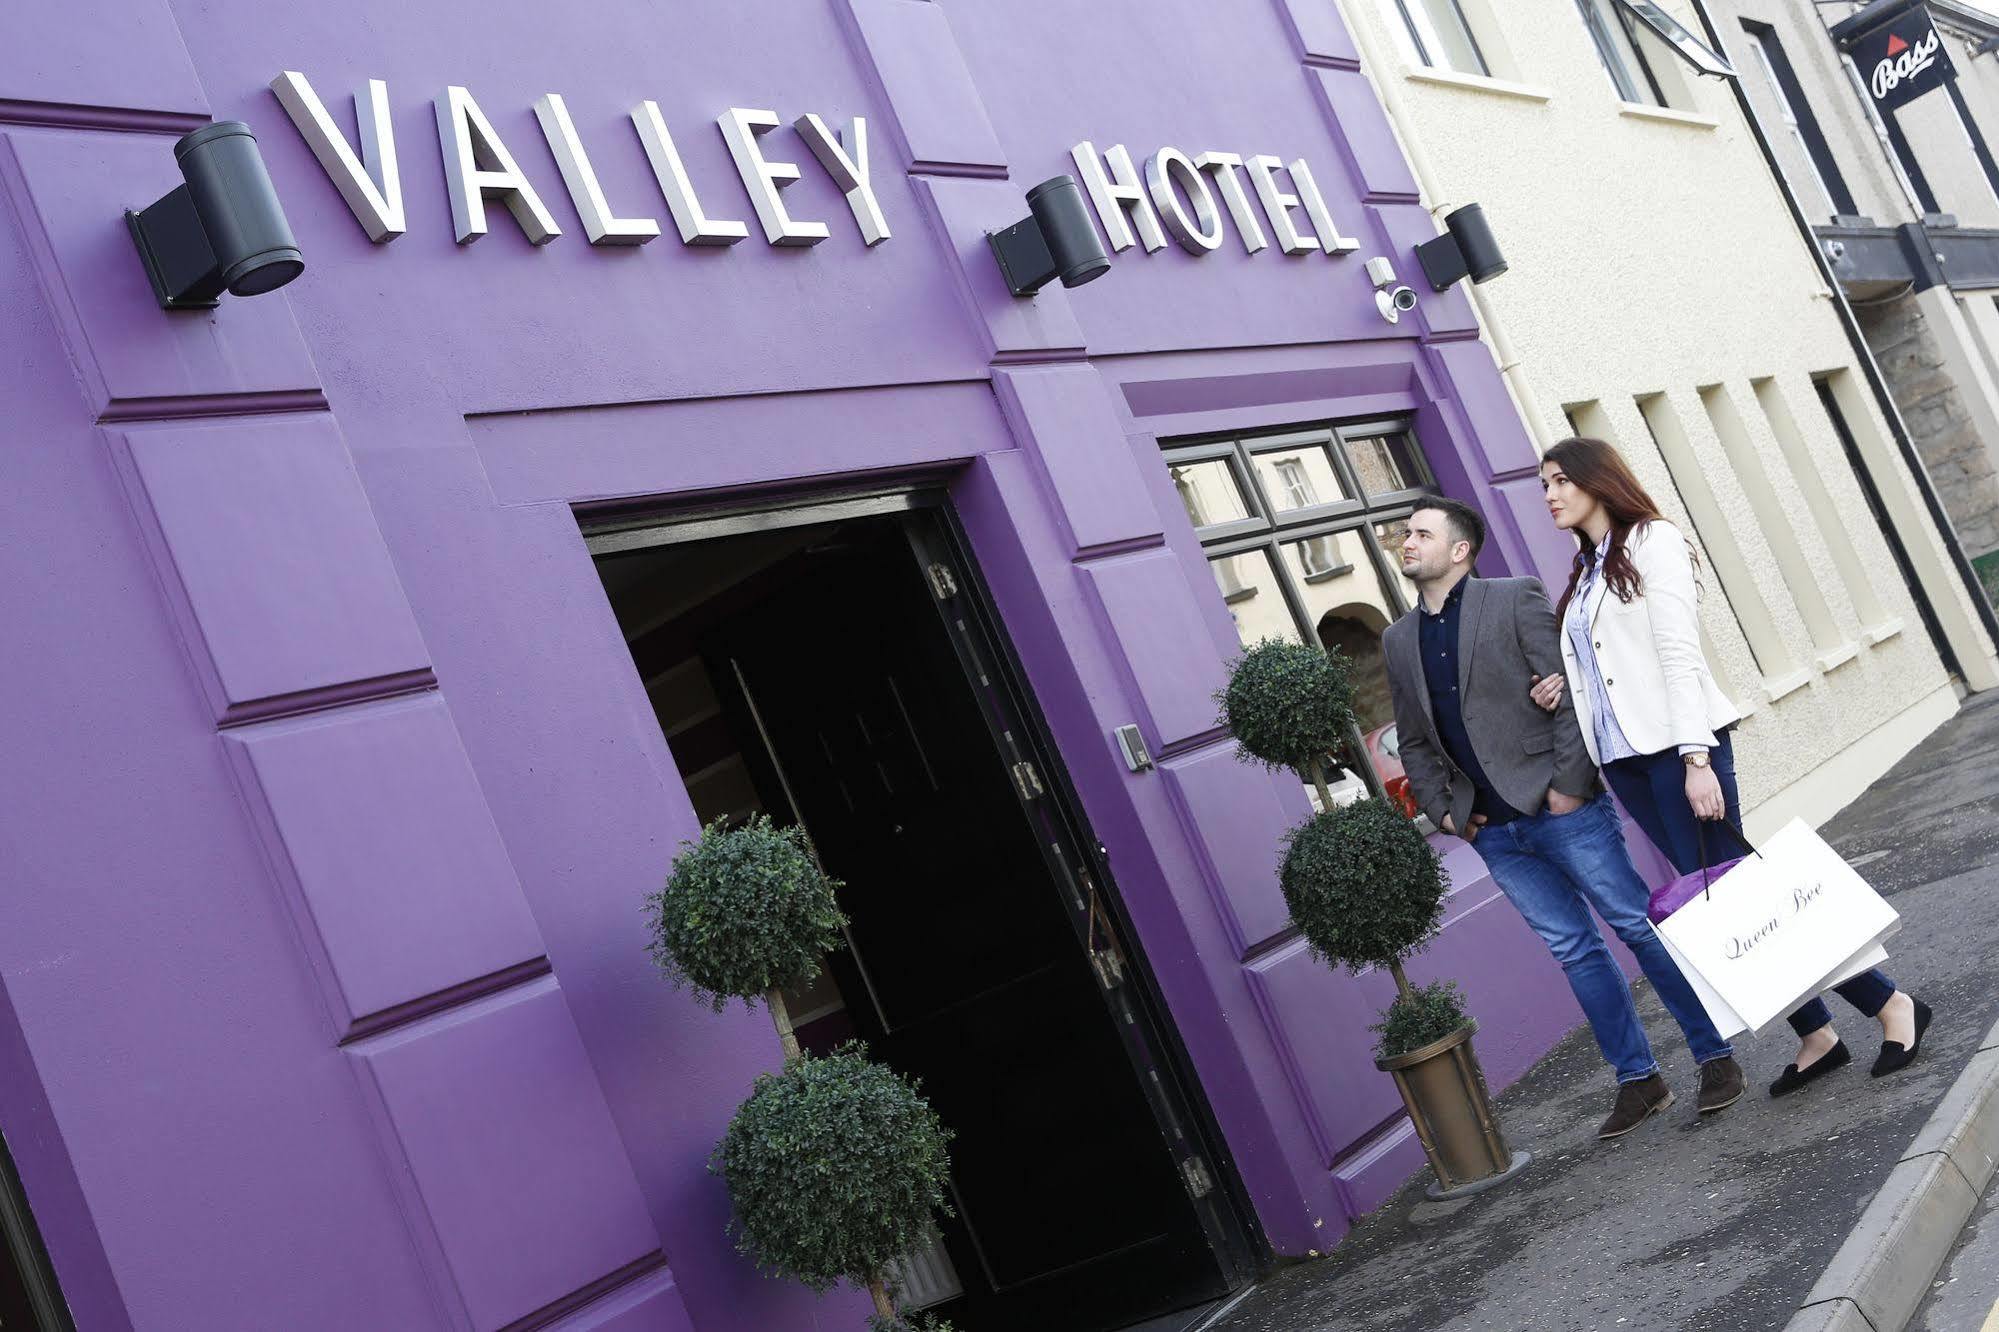 The Valley Hotel & Carriage Gardens Fivemiletown Exterior foto